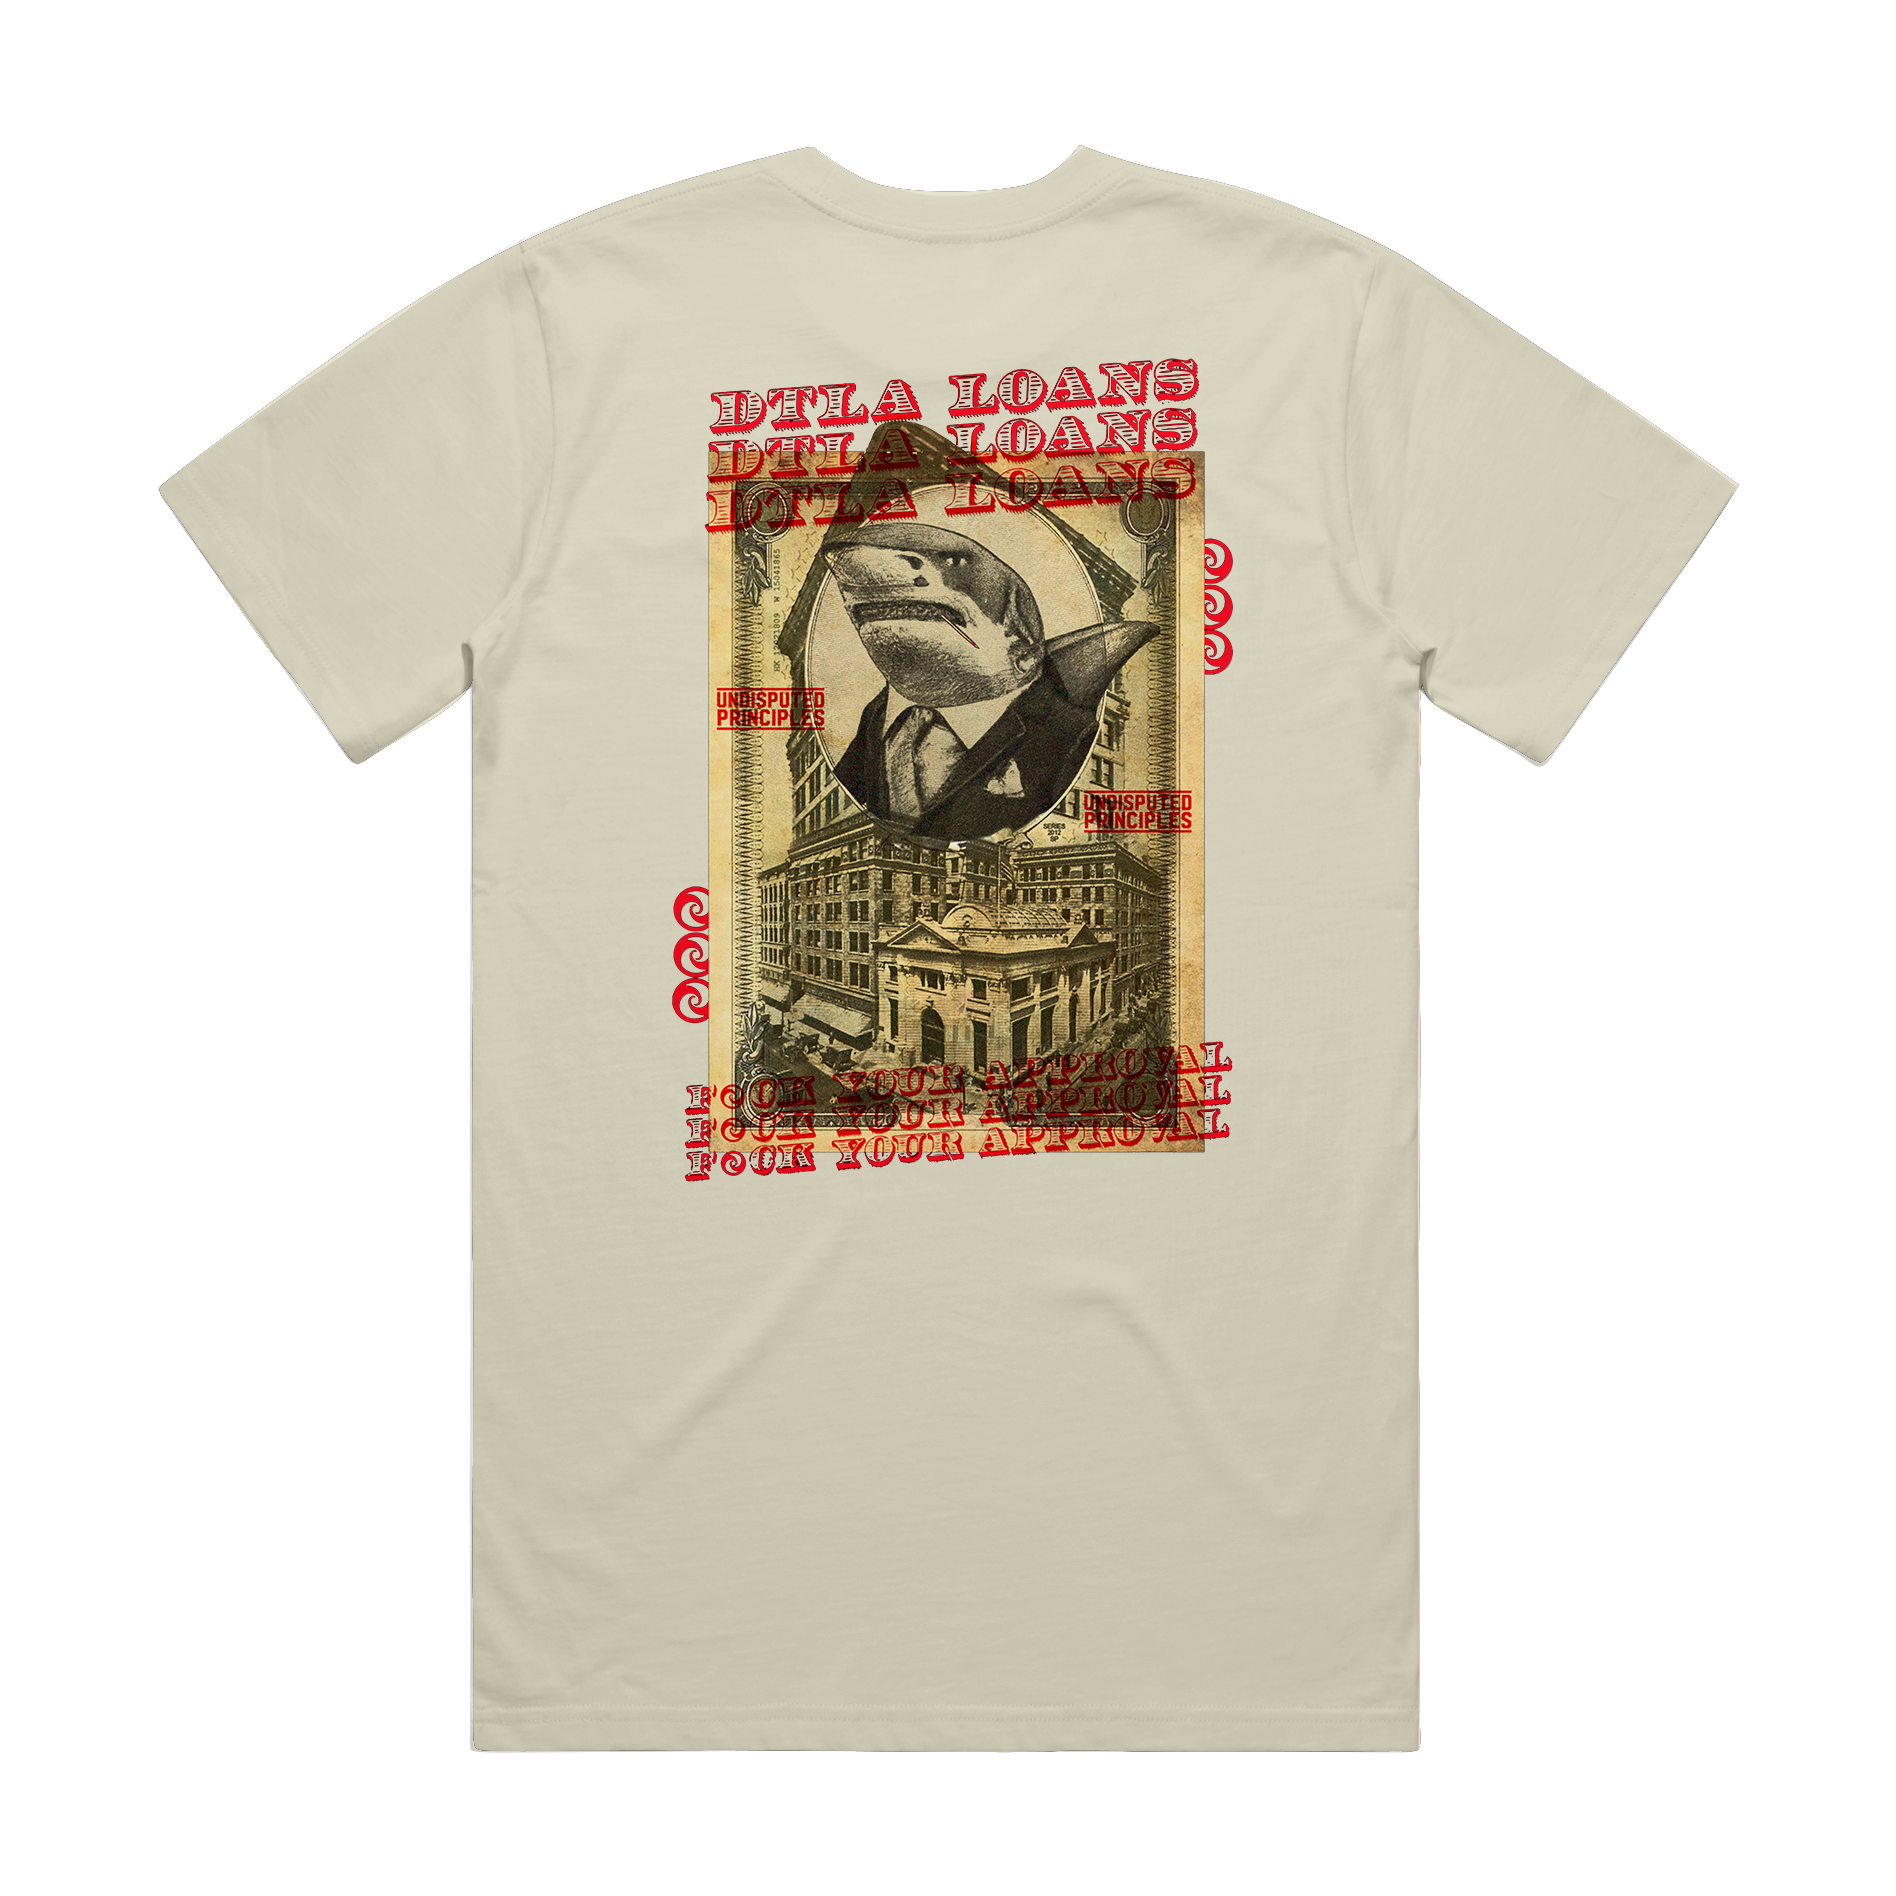 dtla aproval shark graphic short sleevbe tshirt in cream by undusputed principles